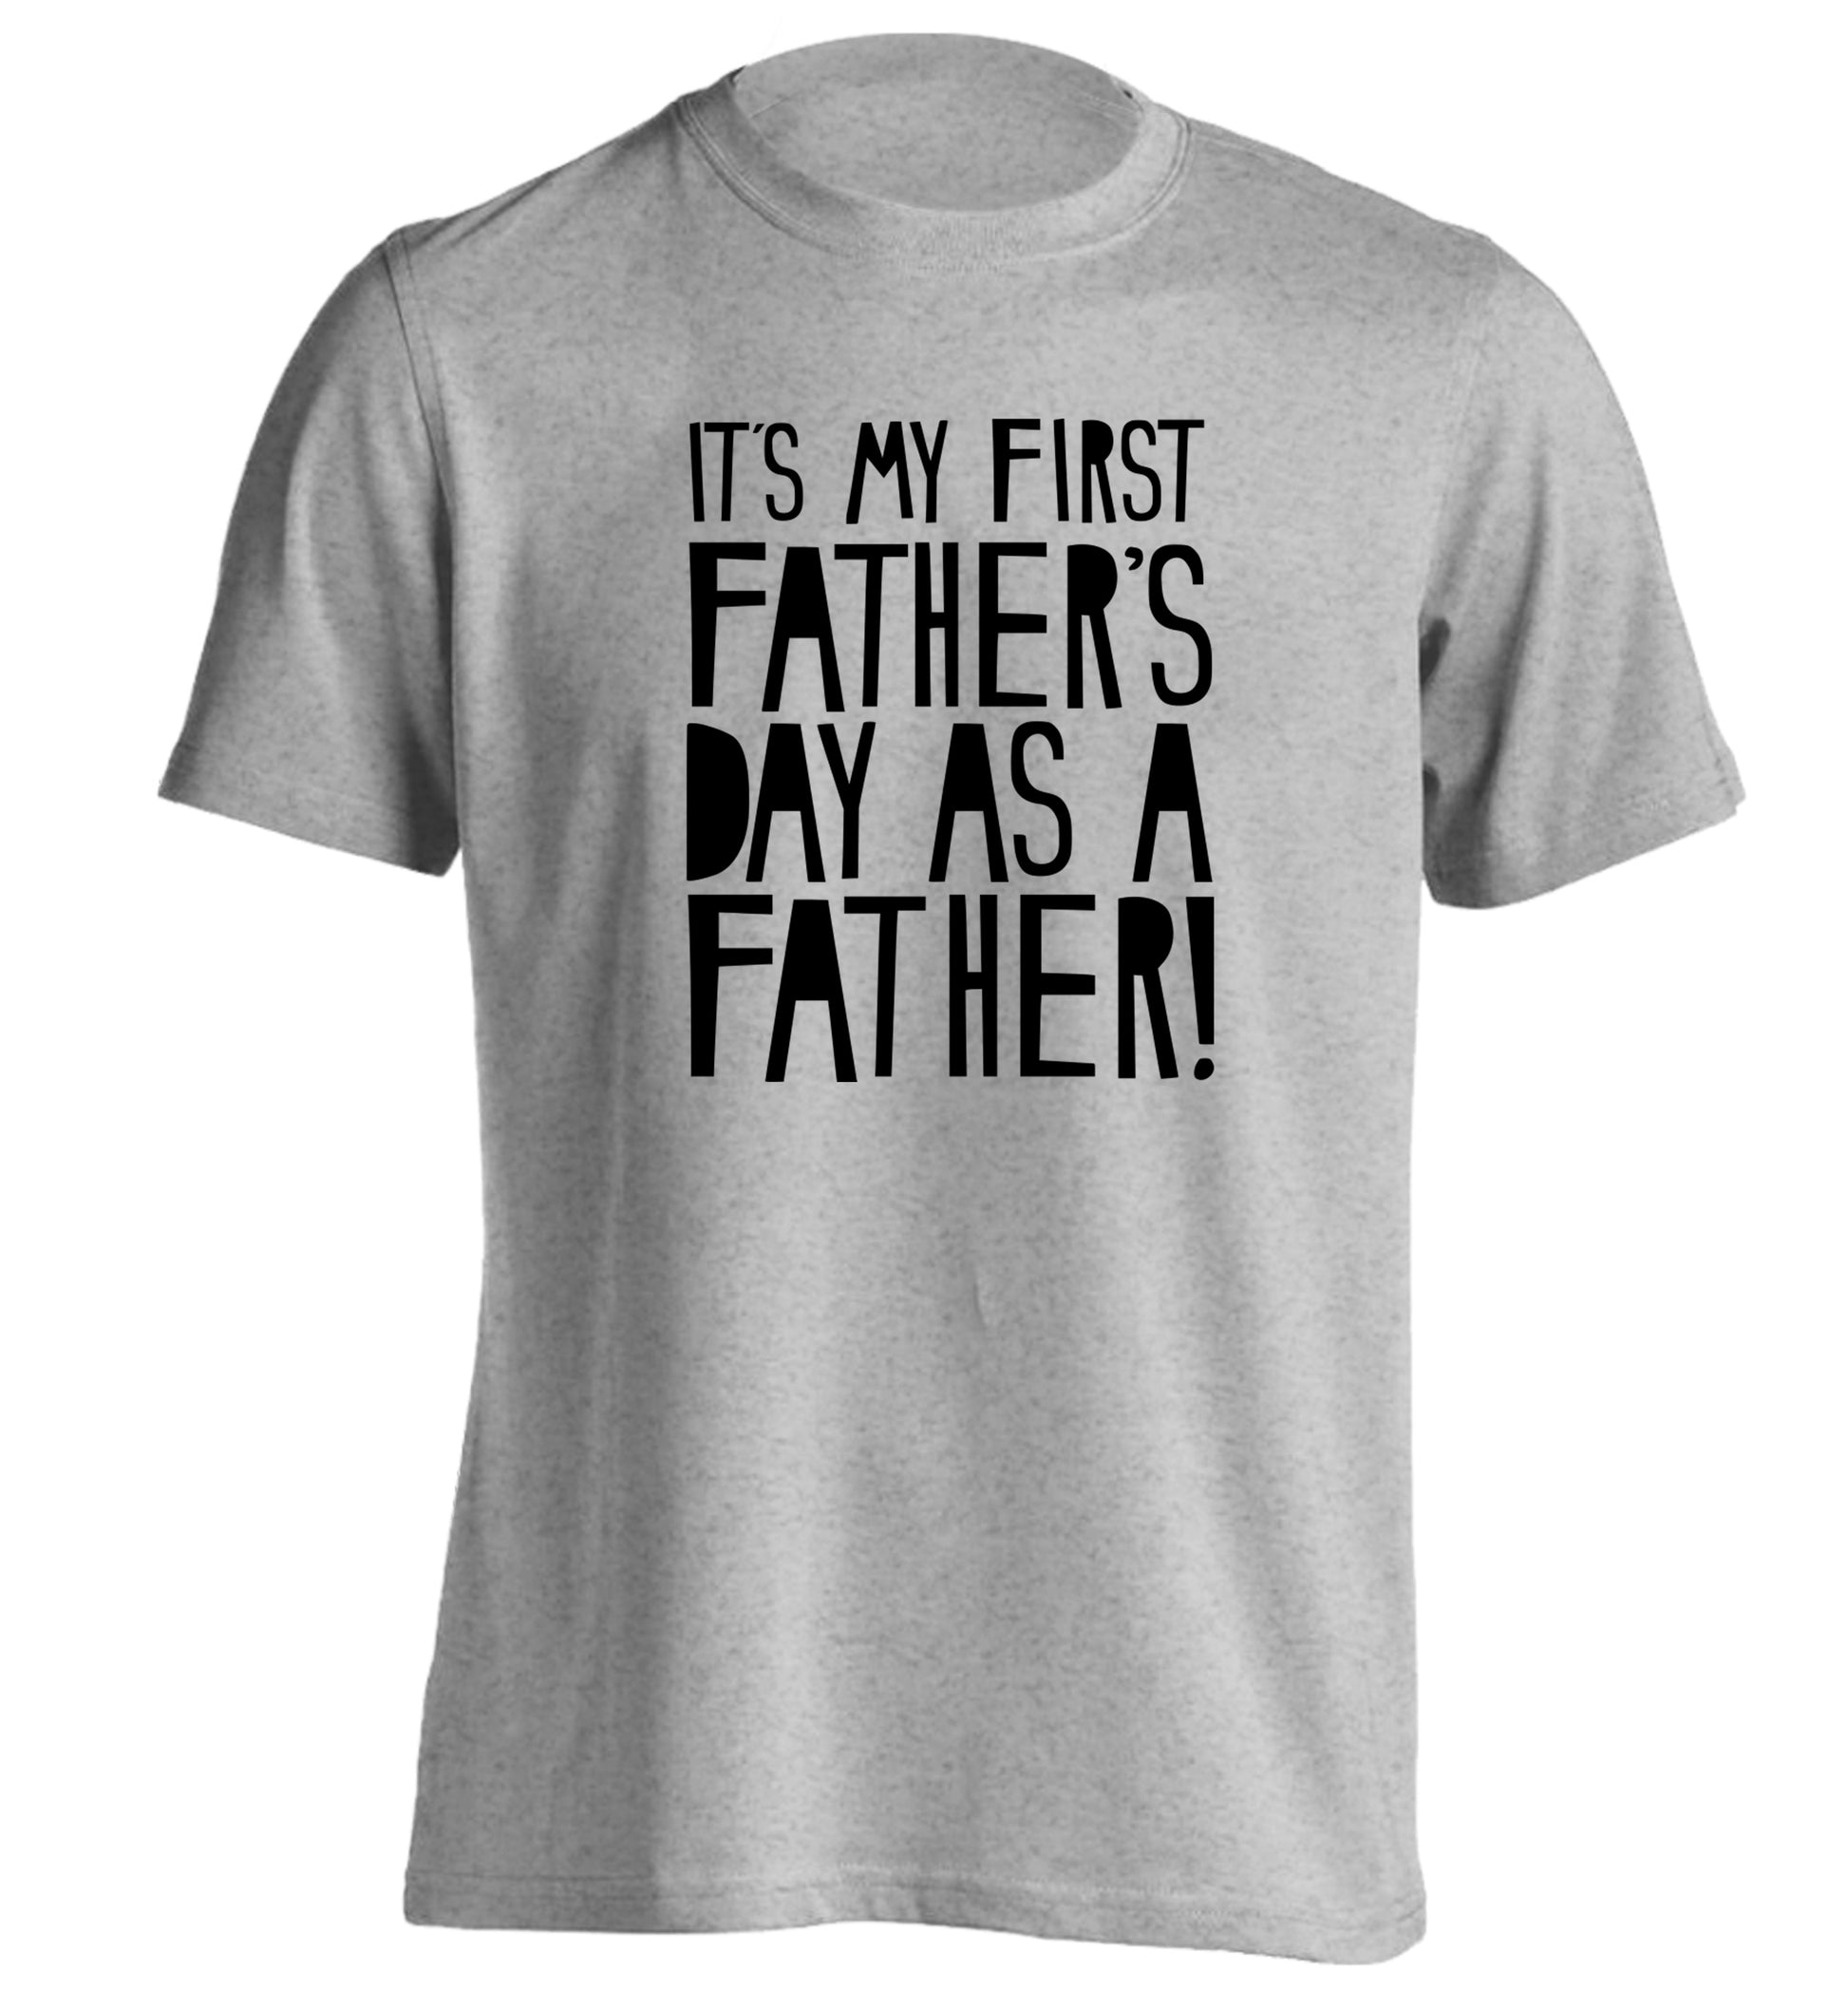 It's my first Father's Day as a father! adults unisex grey Tshirt 2XL